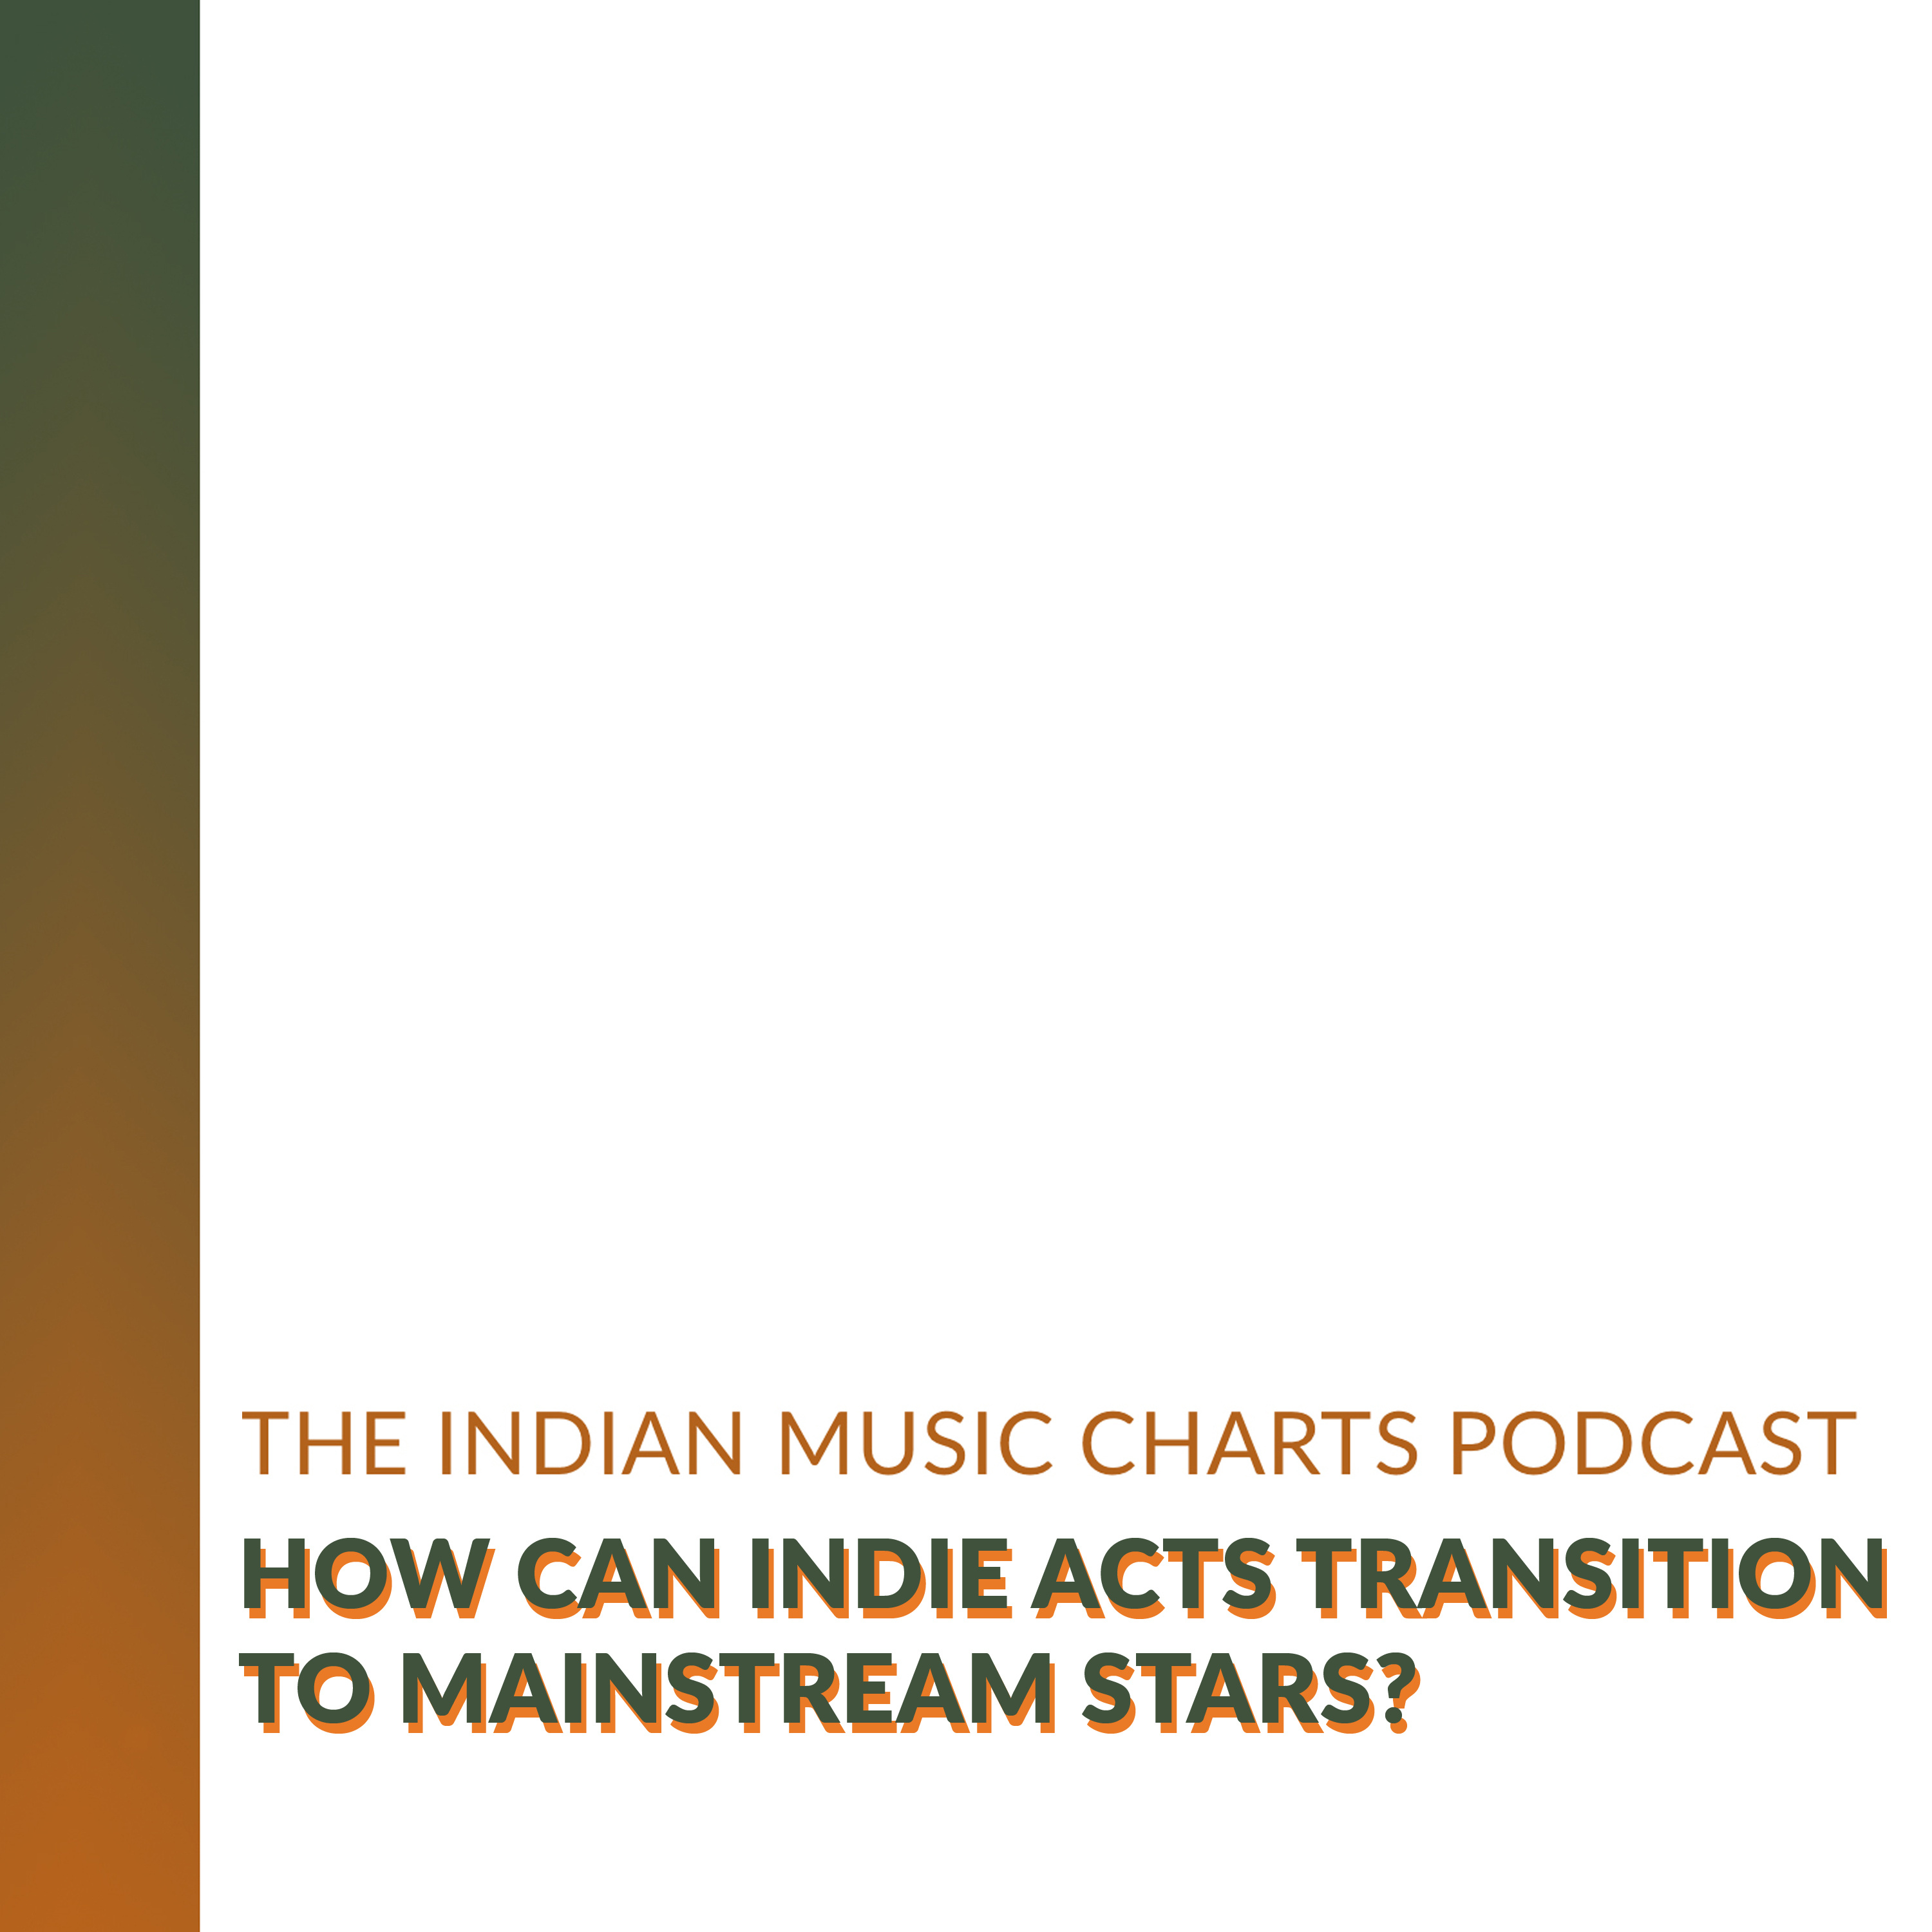 [Bonus] How can indie acts transition to mainstream stars?